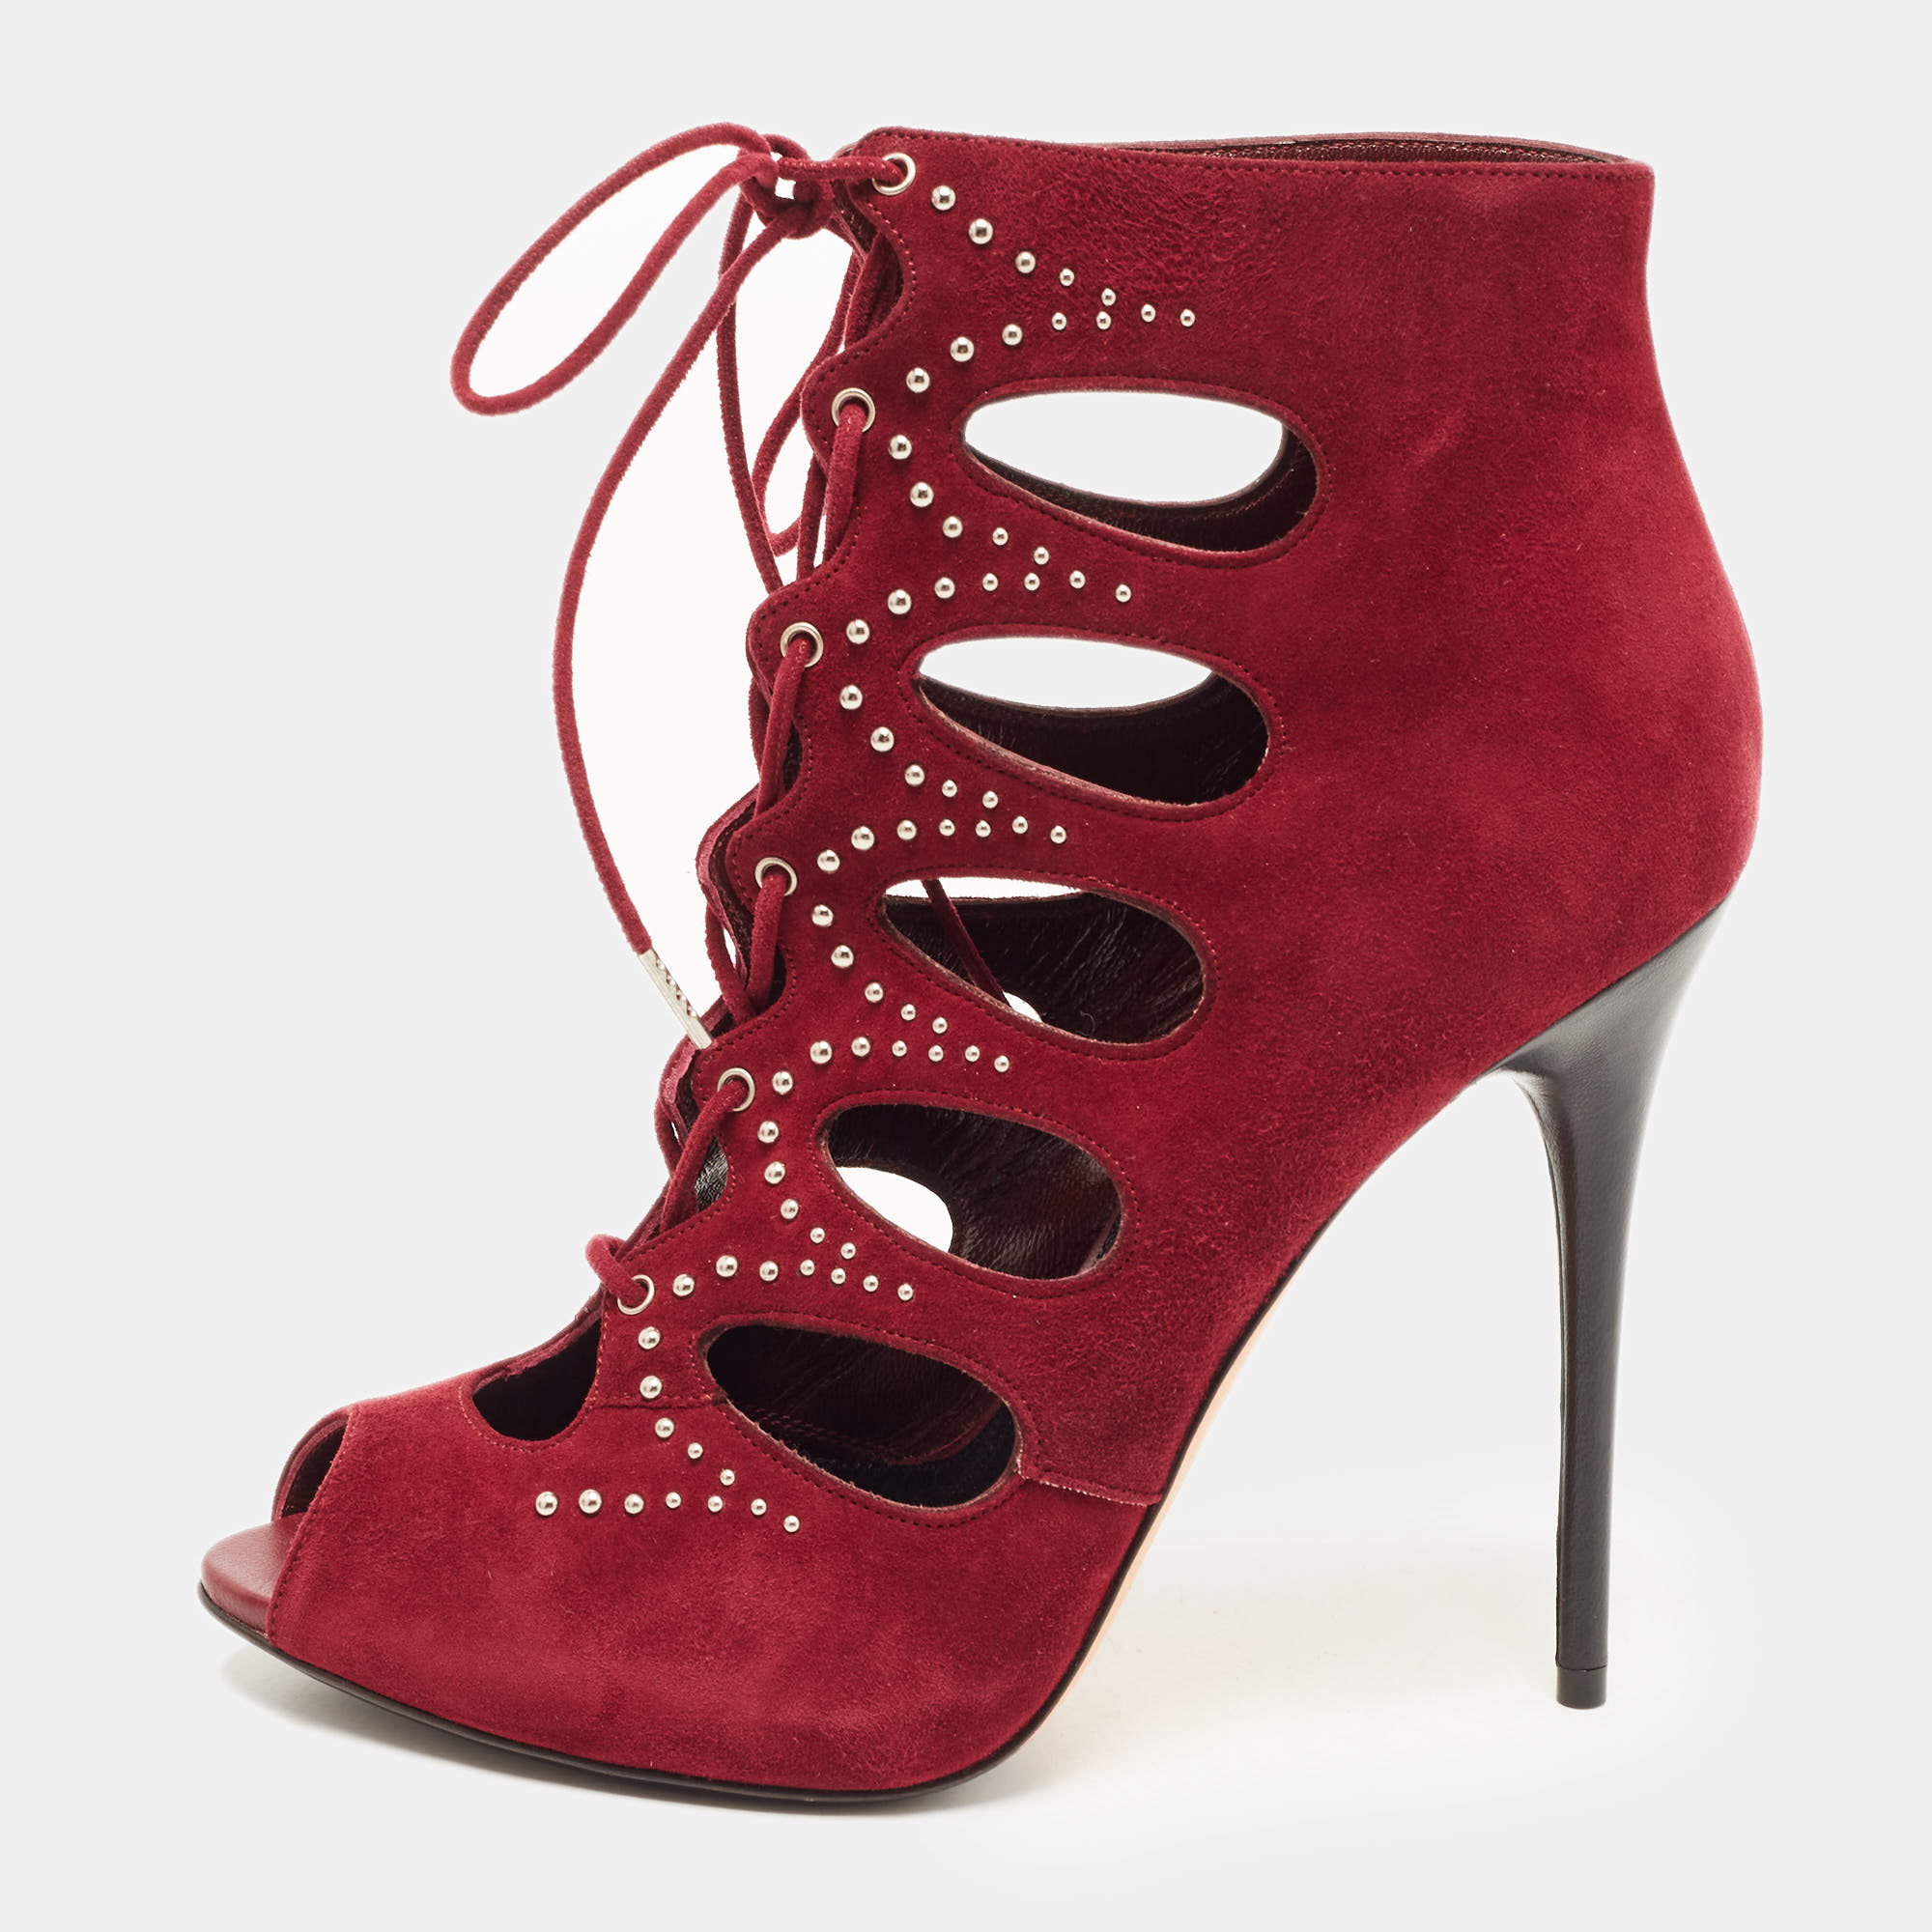 Alexander McQueen Burgundy Suede Cut Out Embellished Lace Up Ankle Booties Size 38